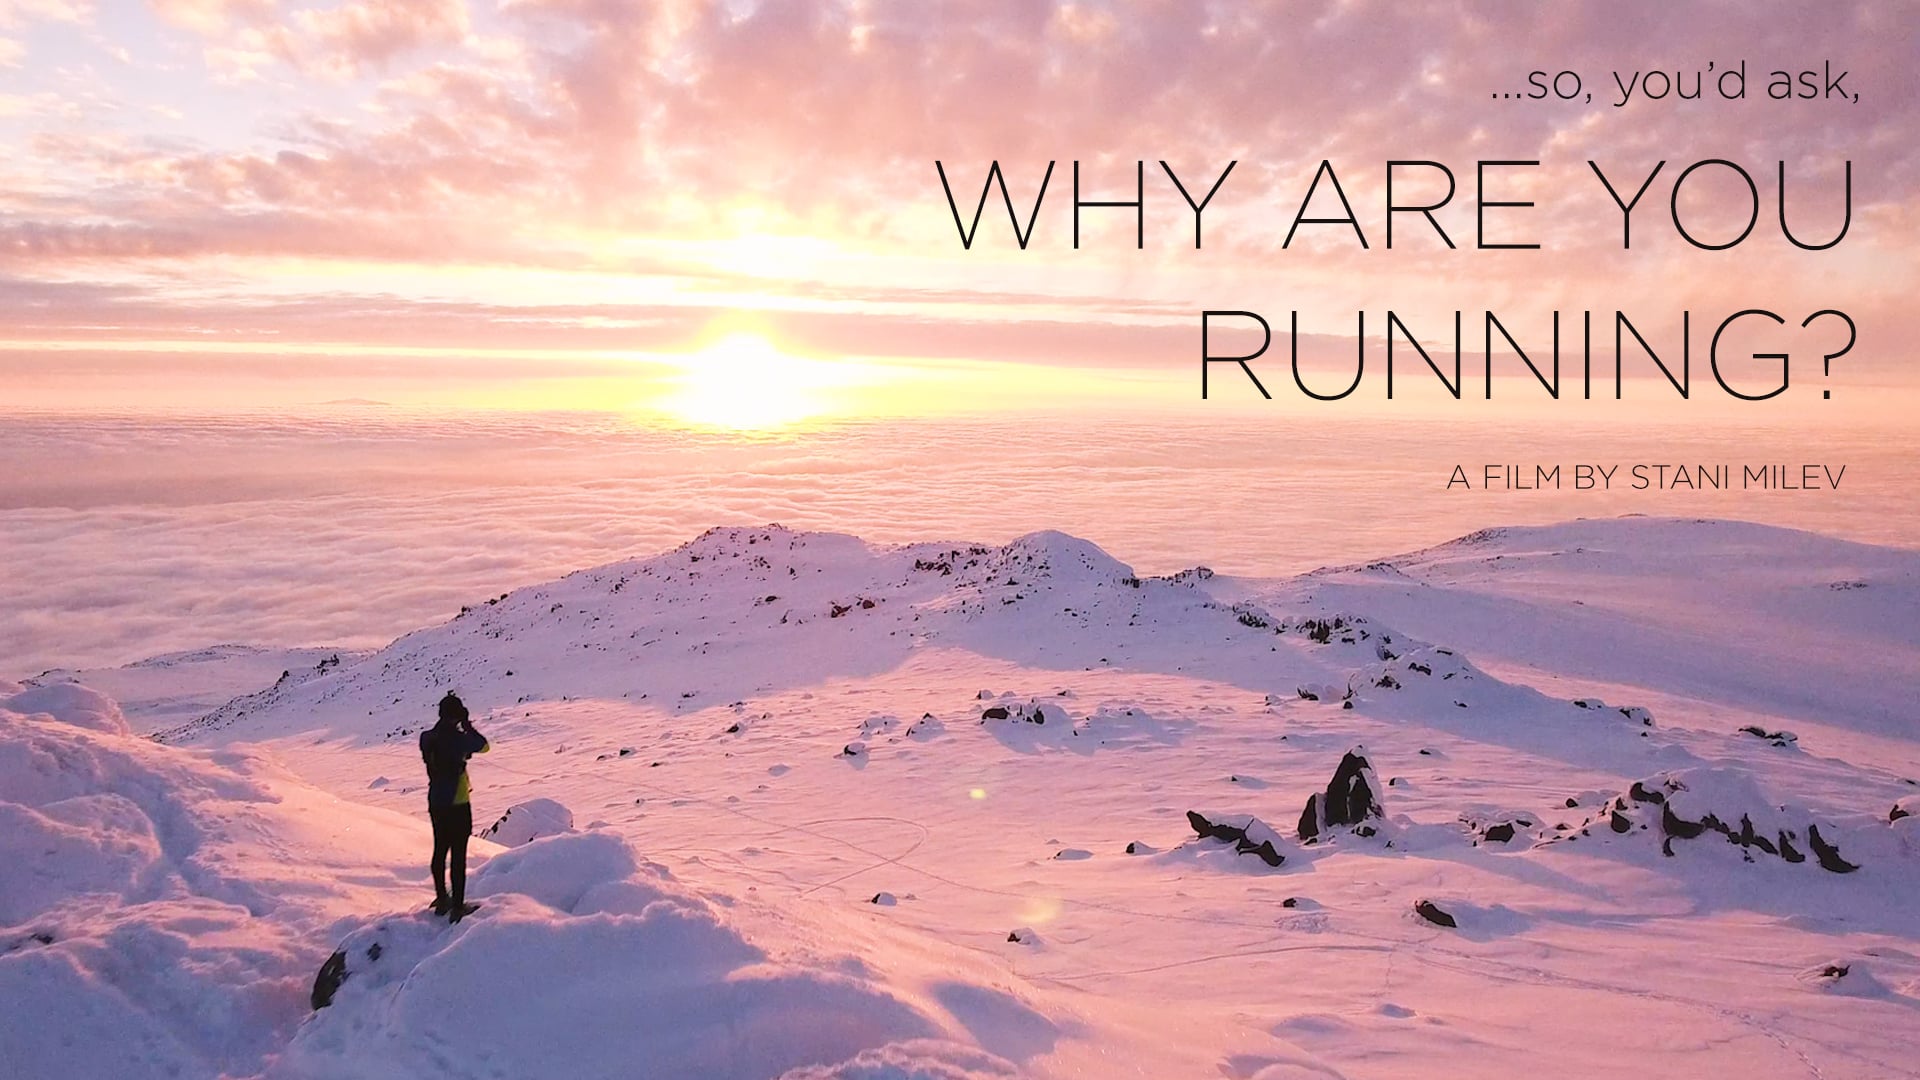 So, you'd ask, why are you running?